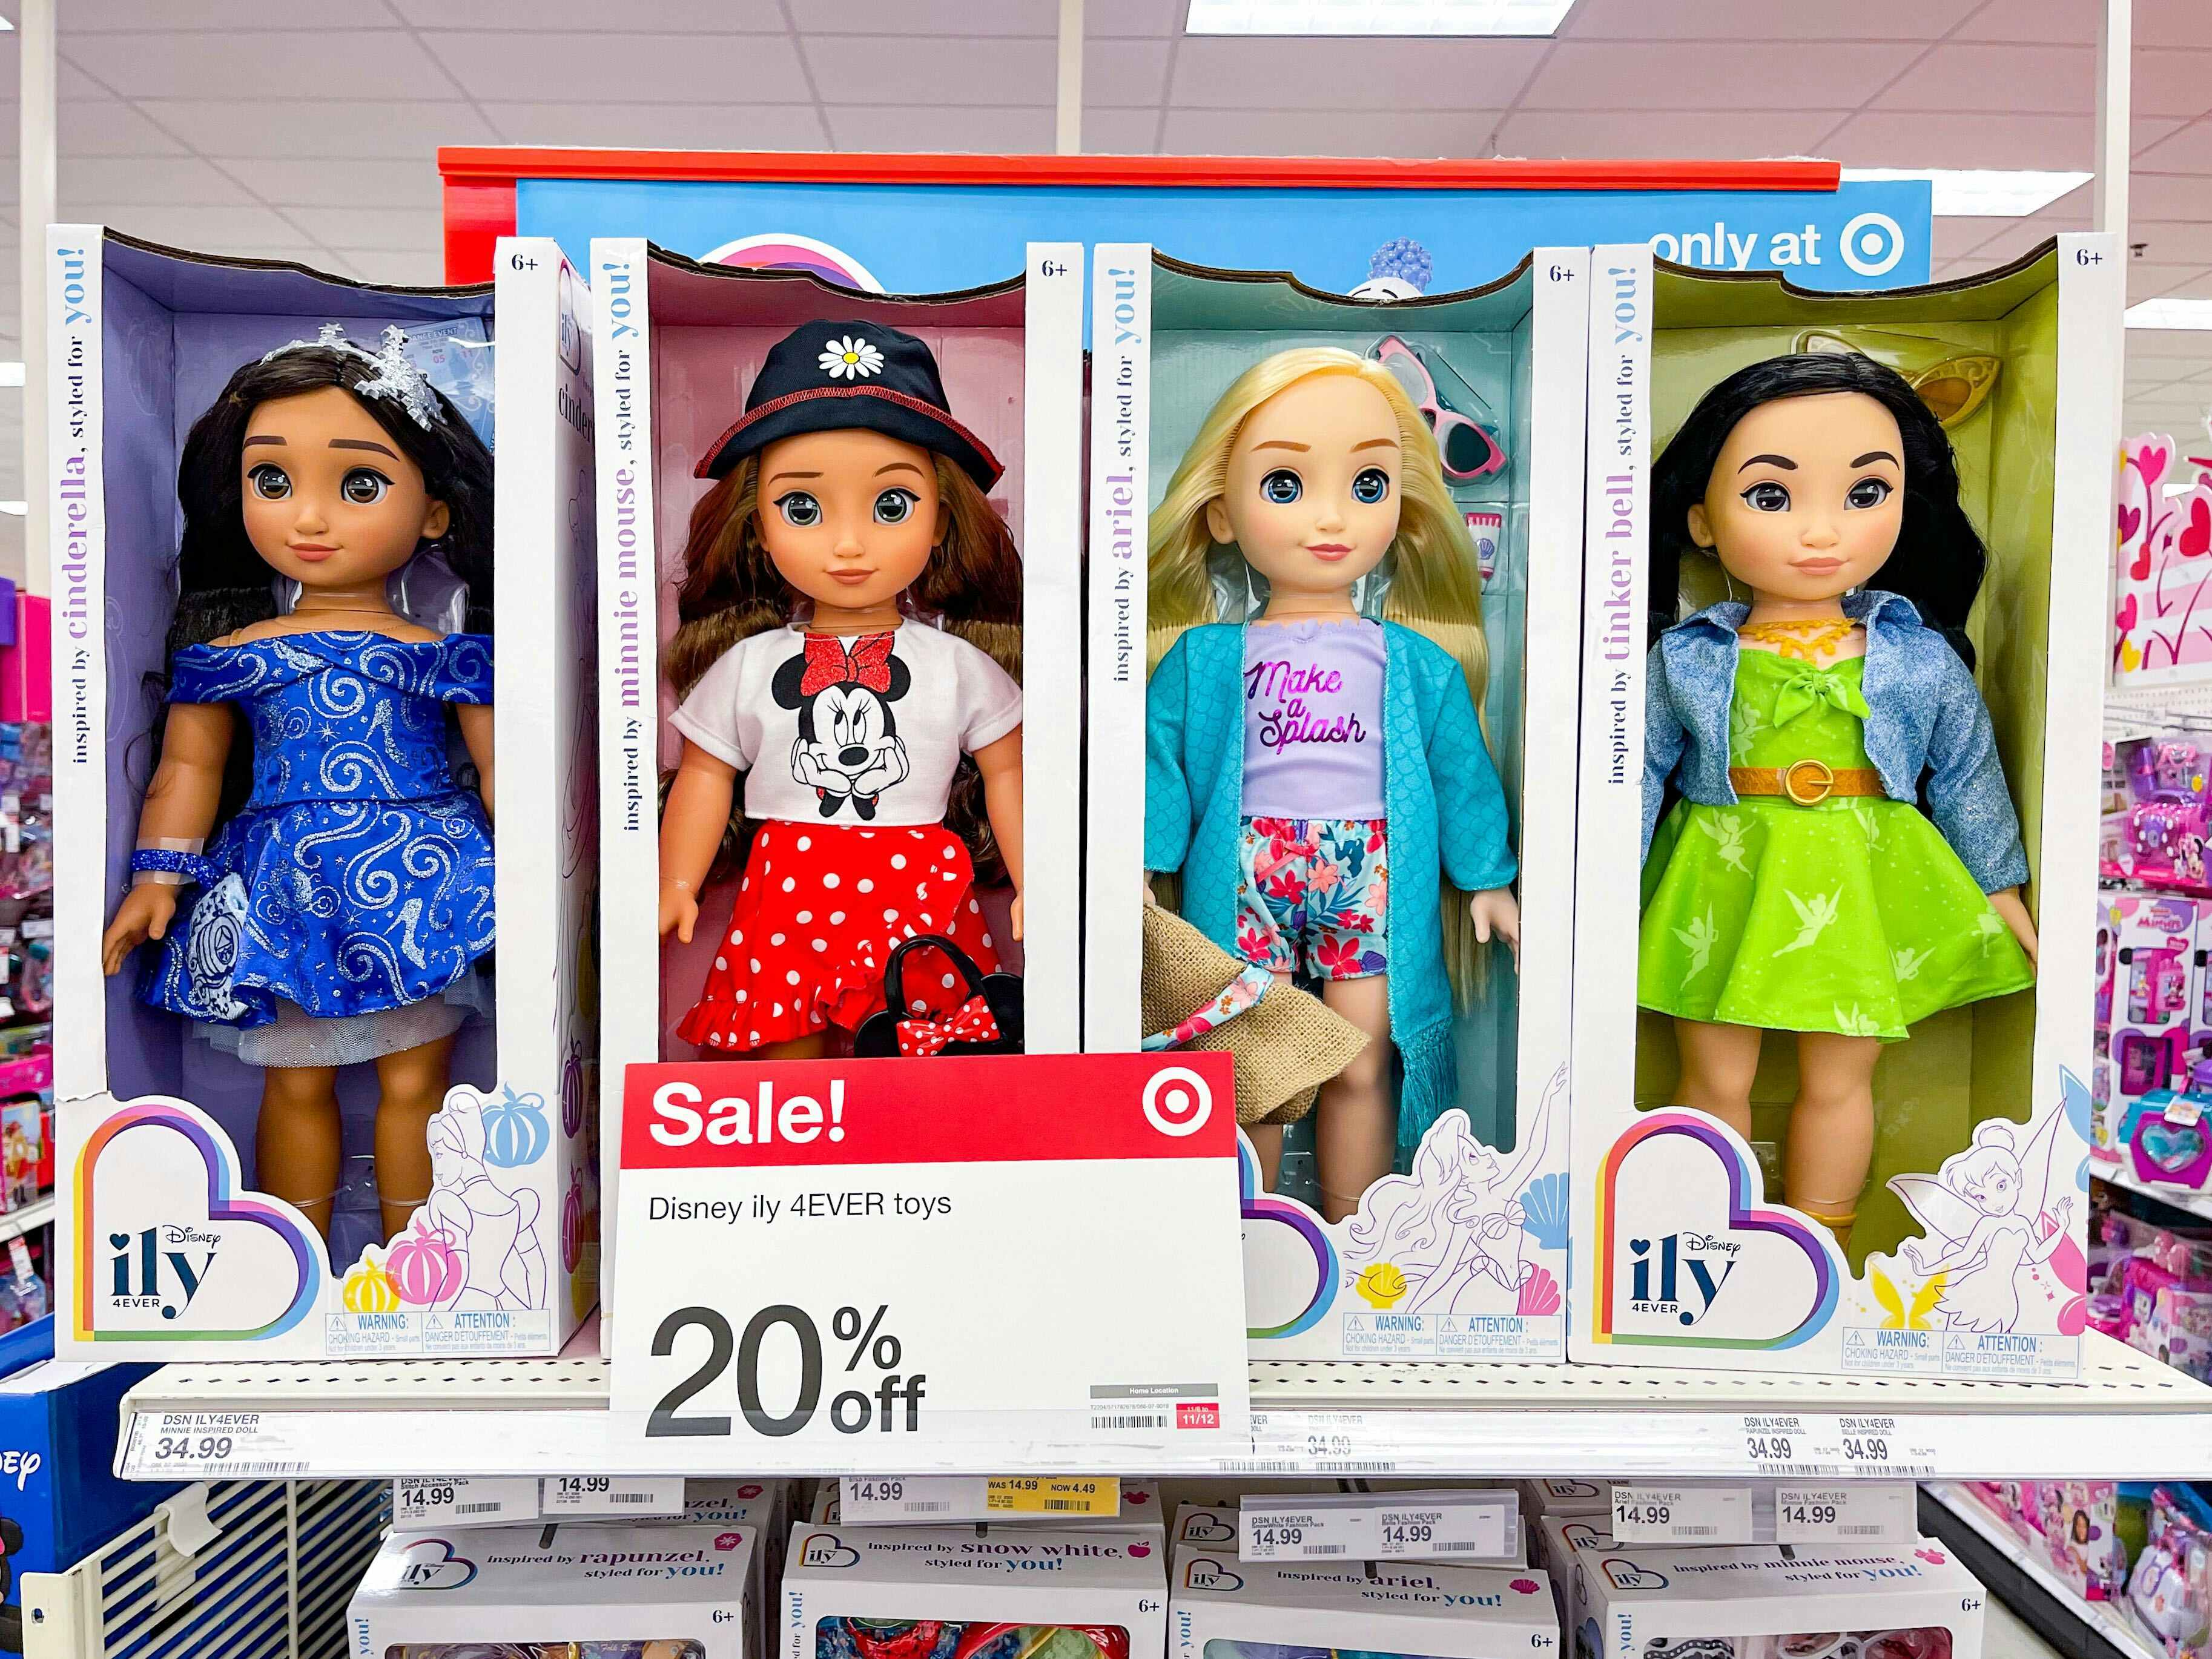 Four New Disney Ily 4Ever Dolls Are Now Available at Target